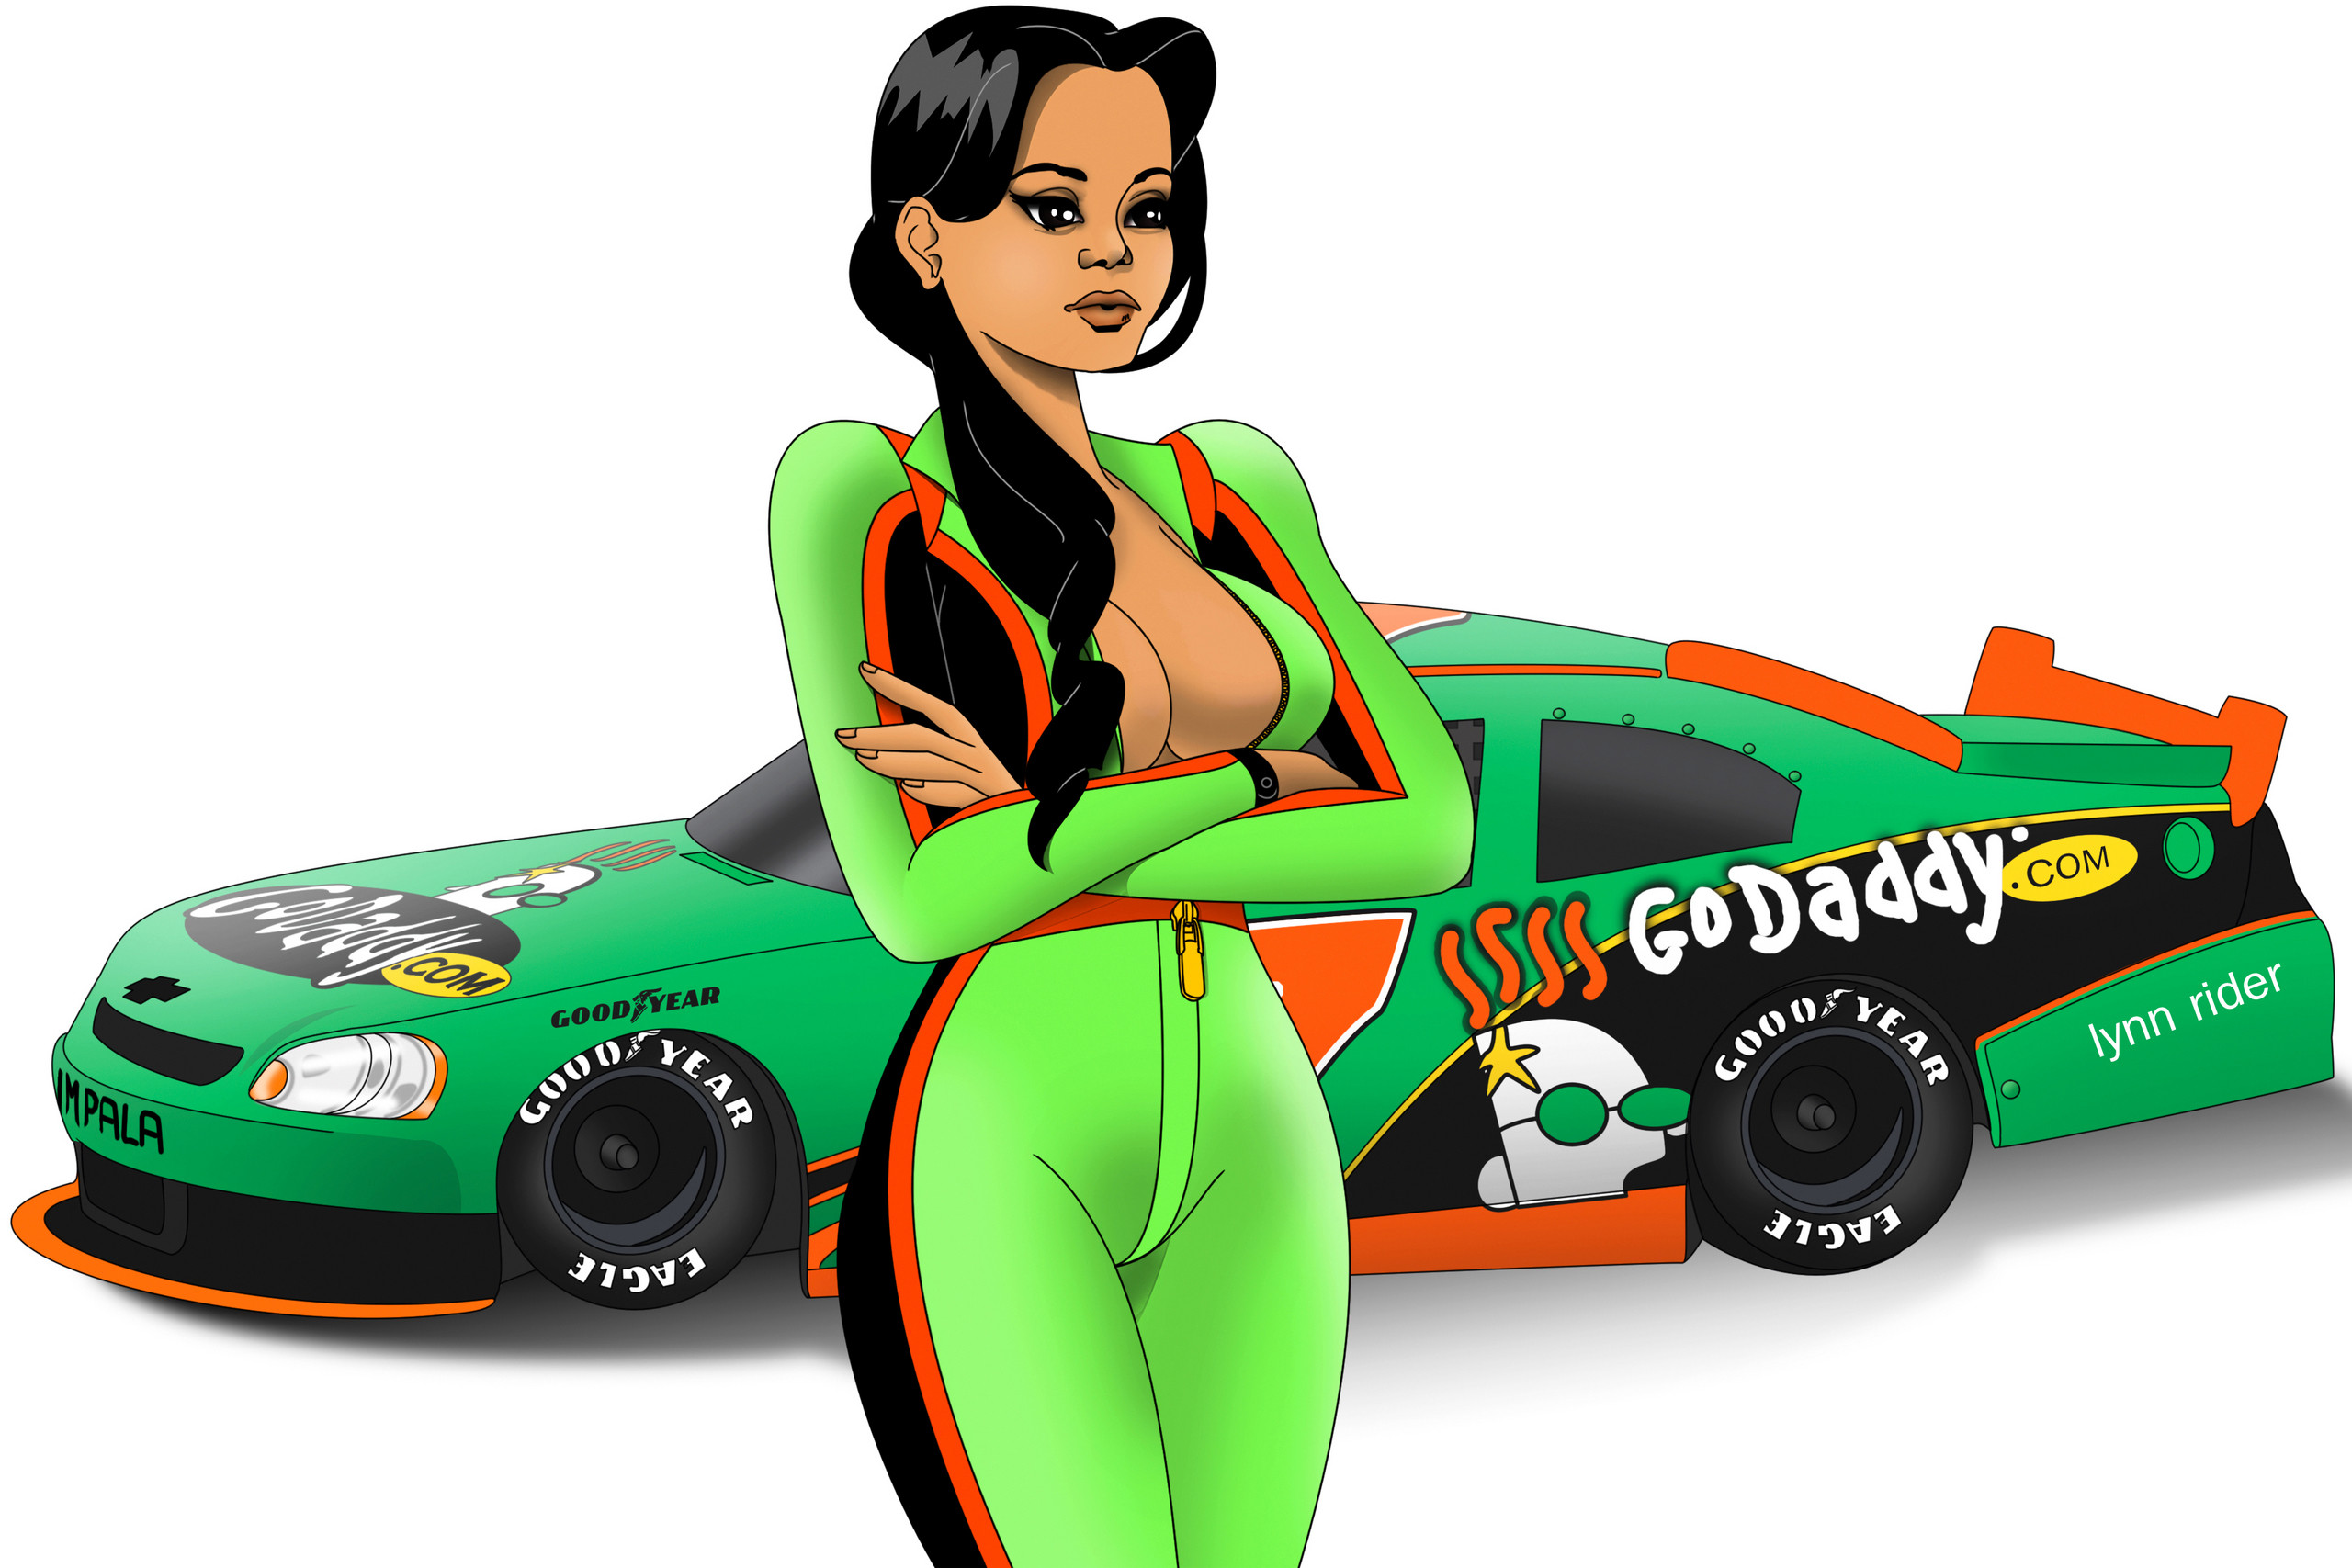 2560x1707 Danica Patrick images go daddy danica HD wallpaper and background photos